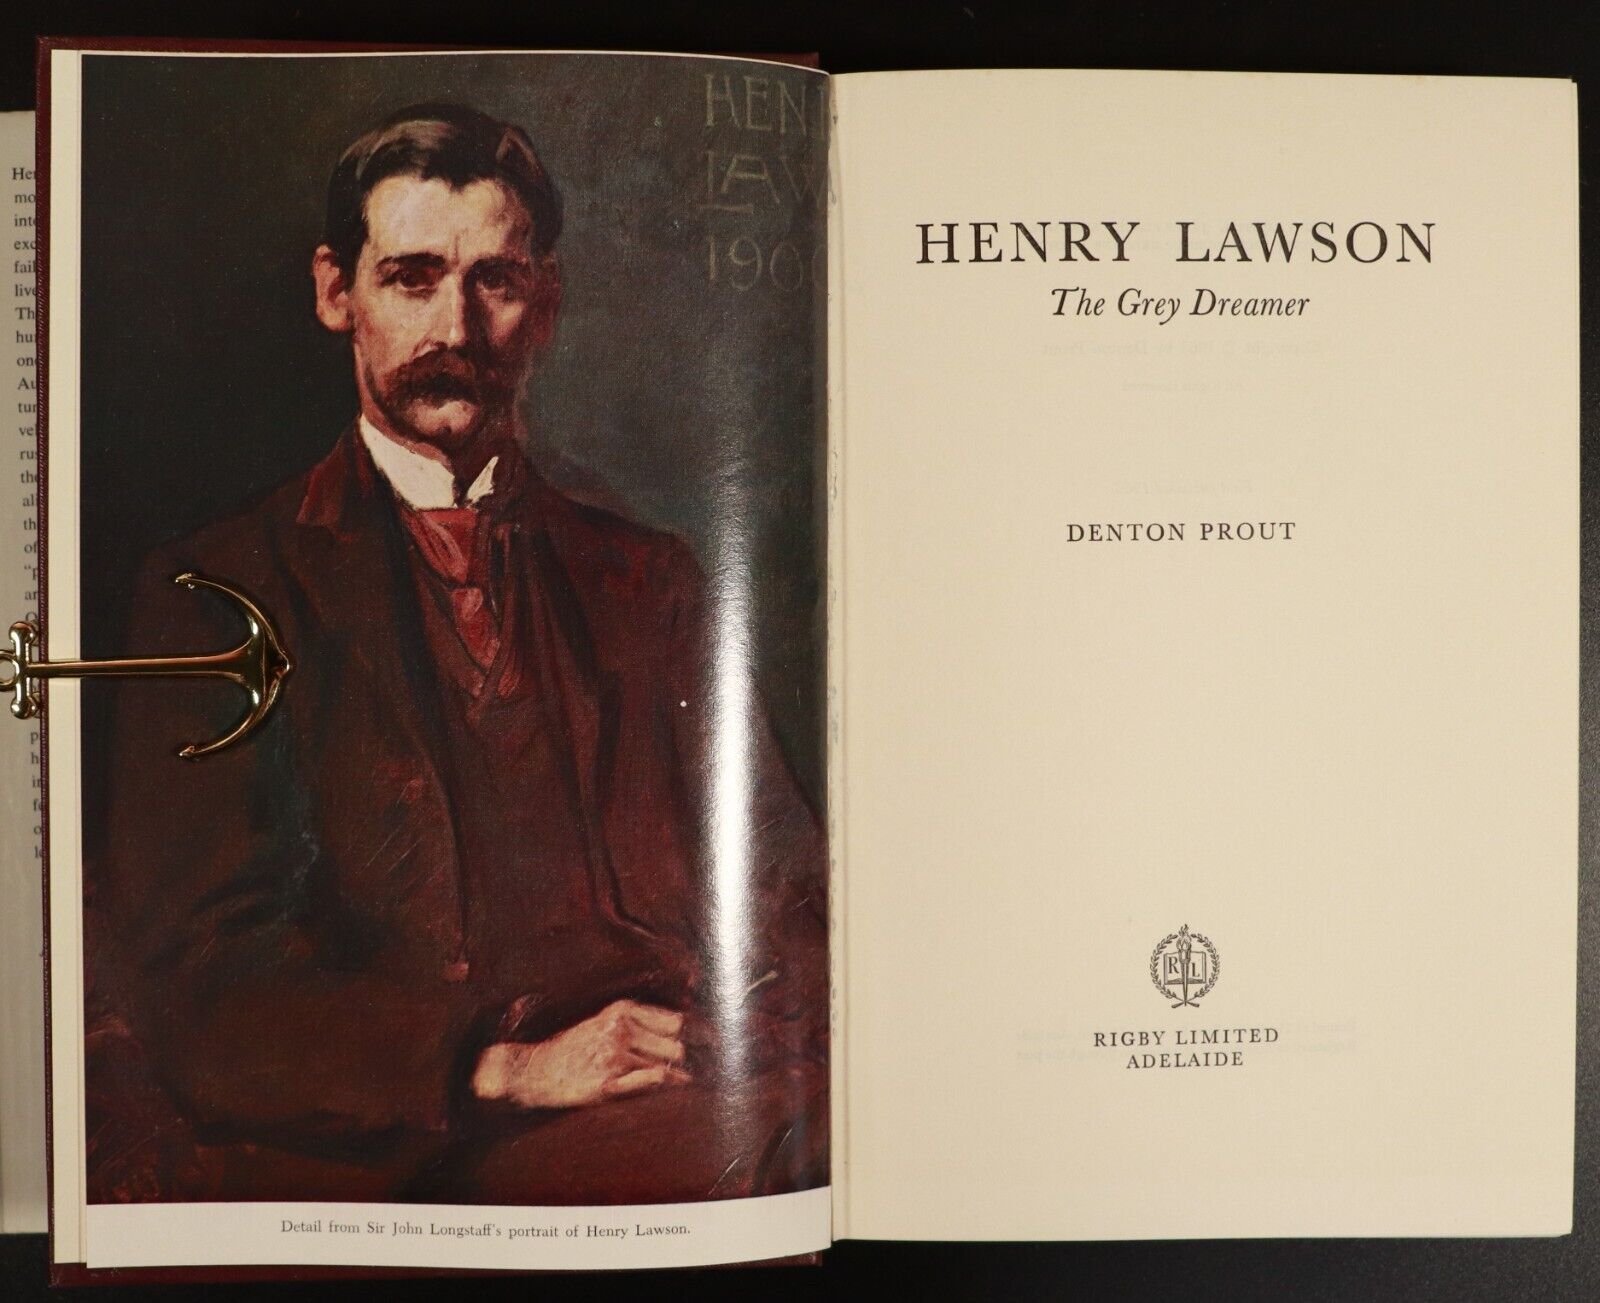 1963 Henry Lawson: The Grey Dreamer by Denton Prout Australian History Book